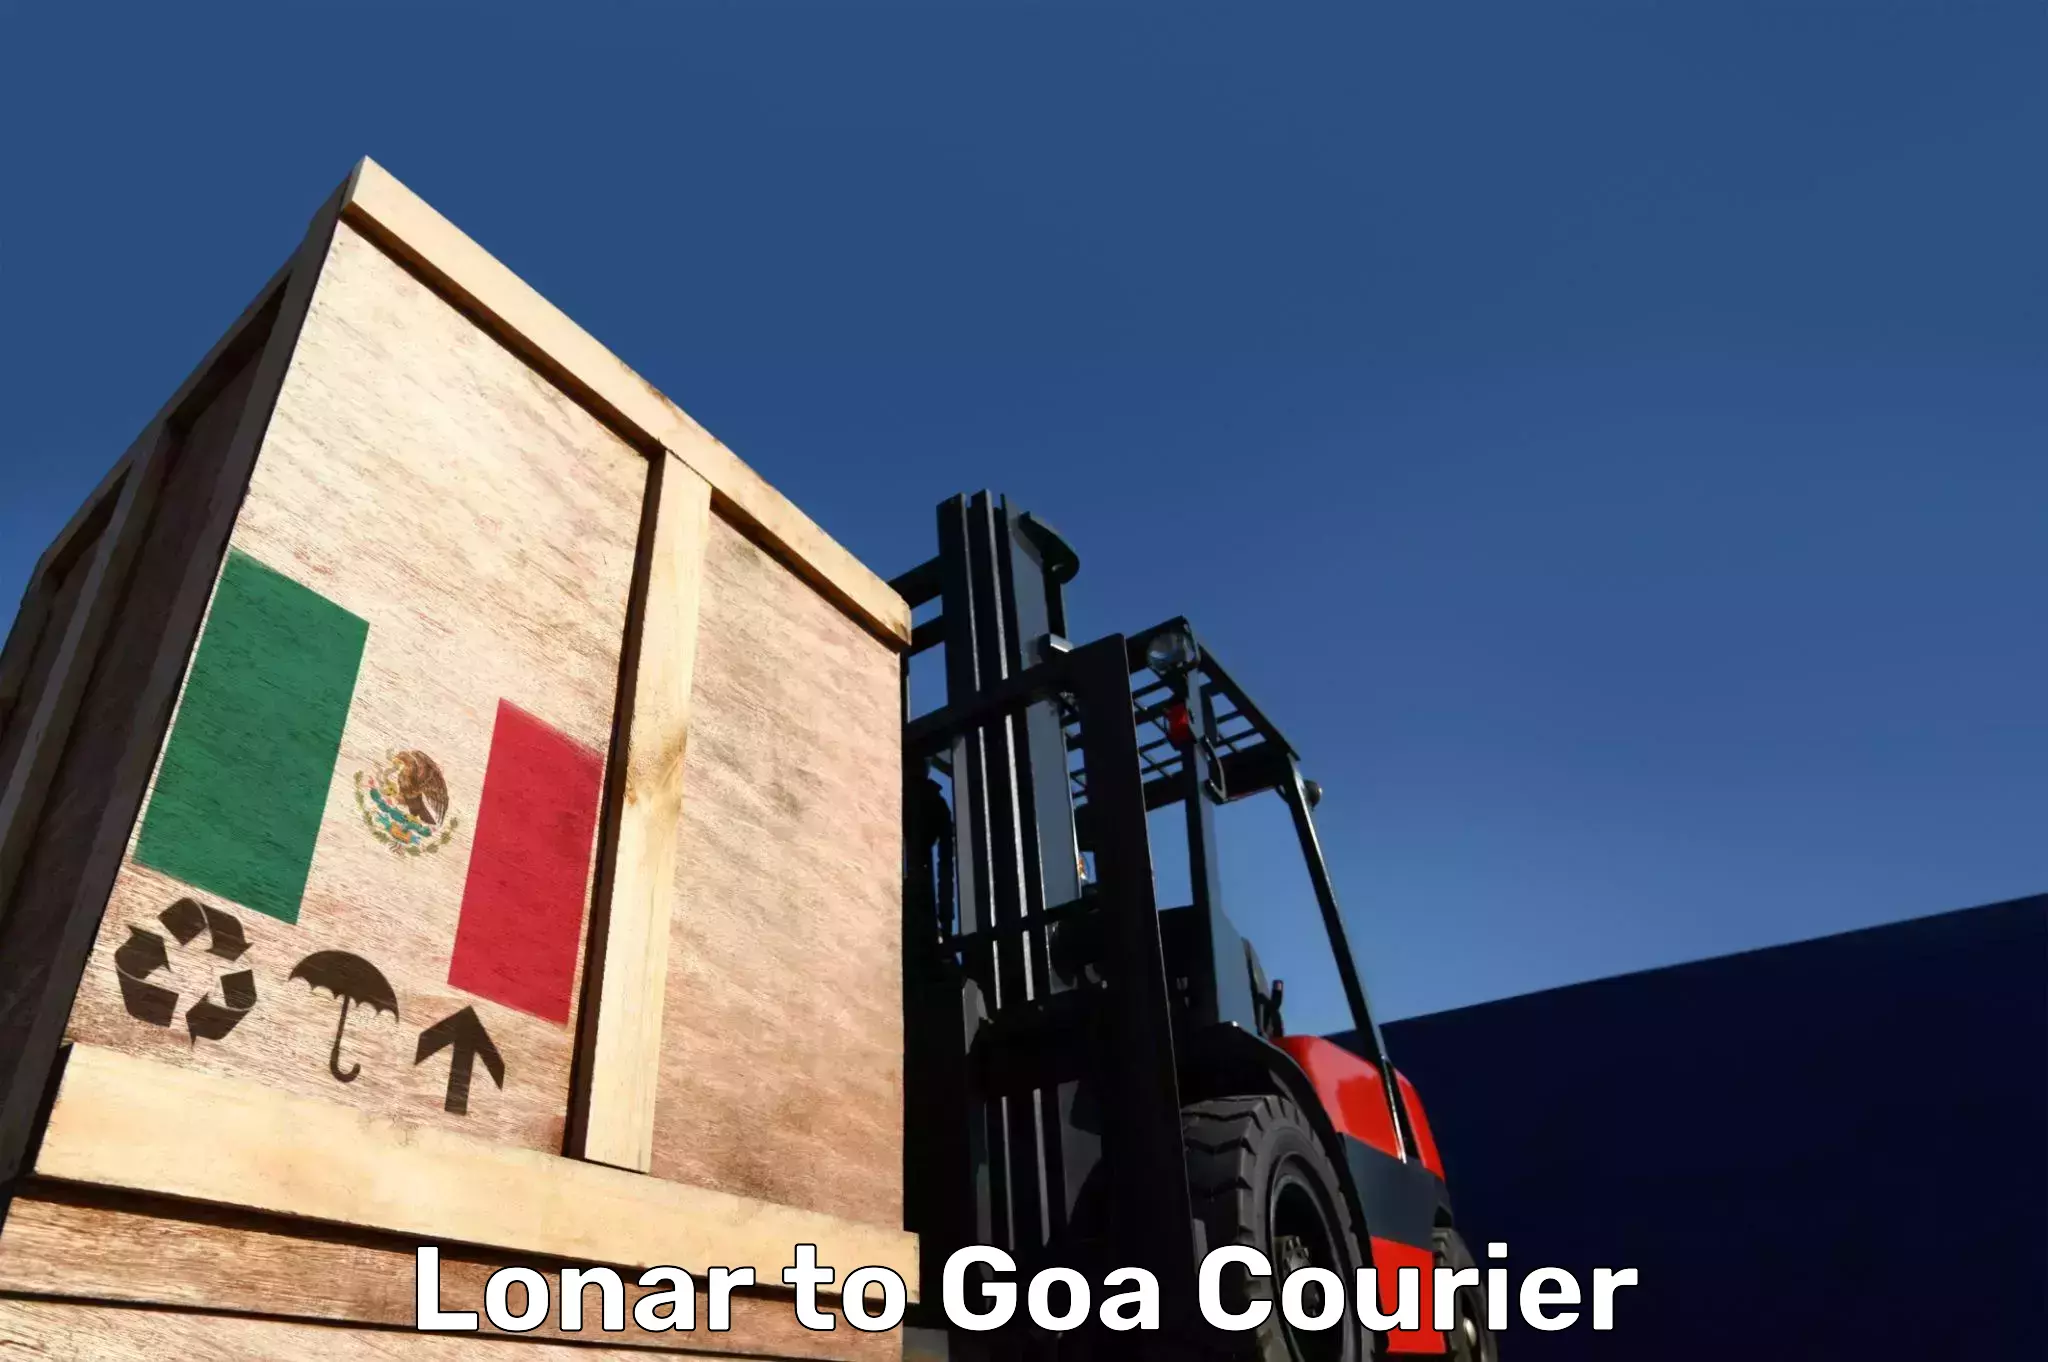 Luggage transport consultancy Lonar to Goa